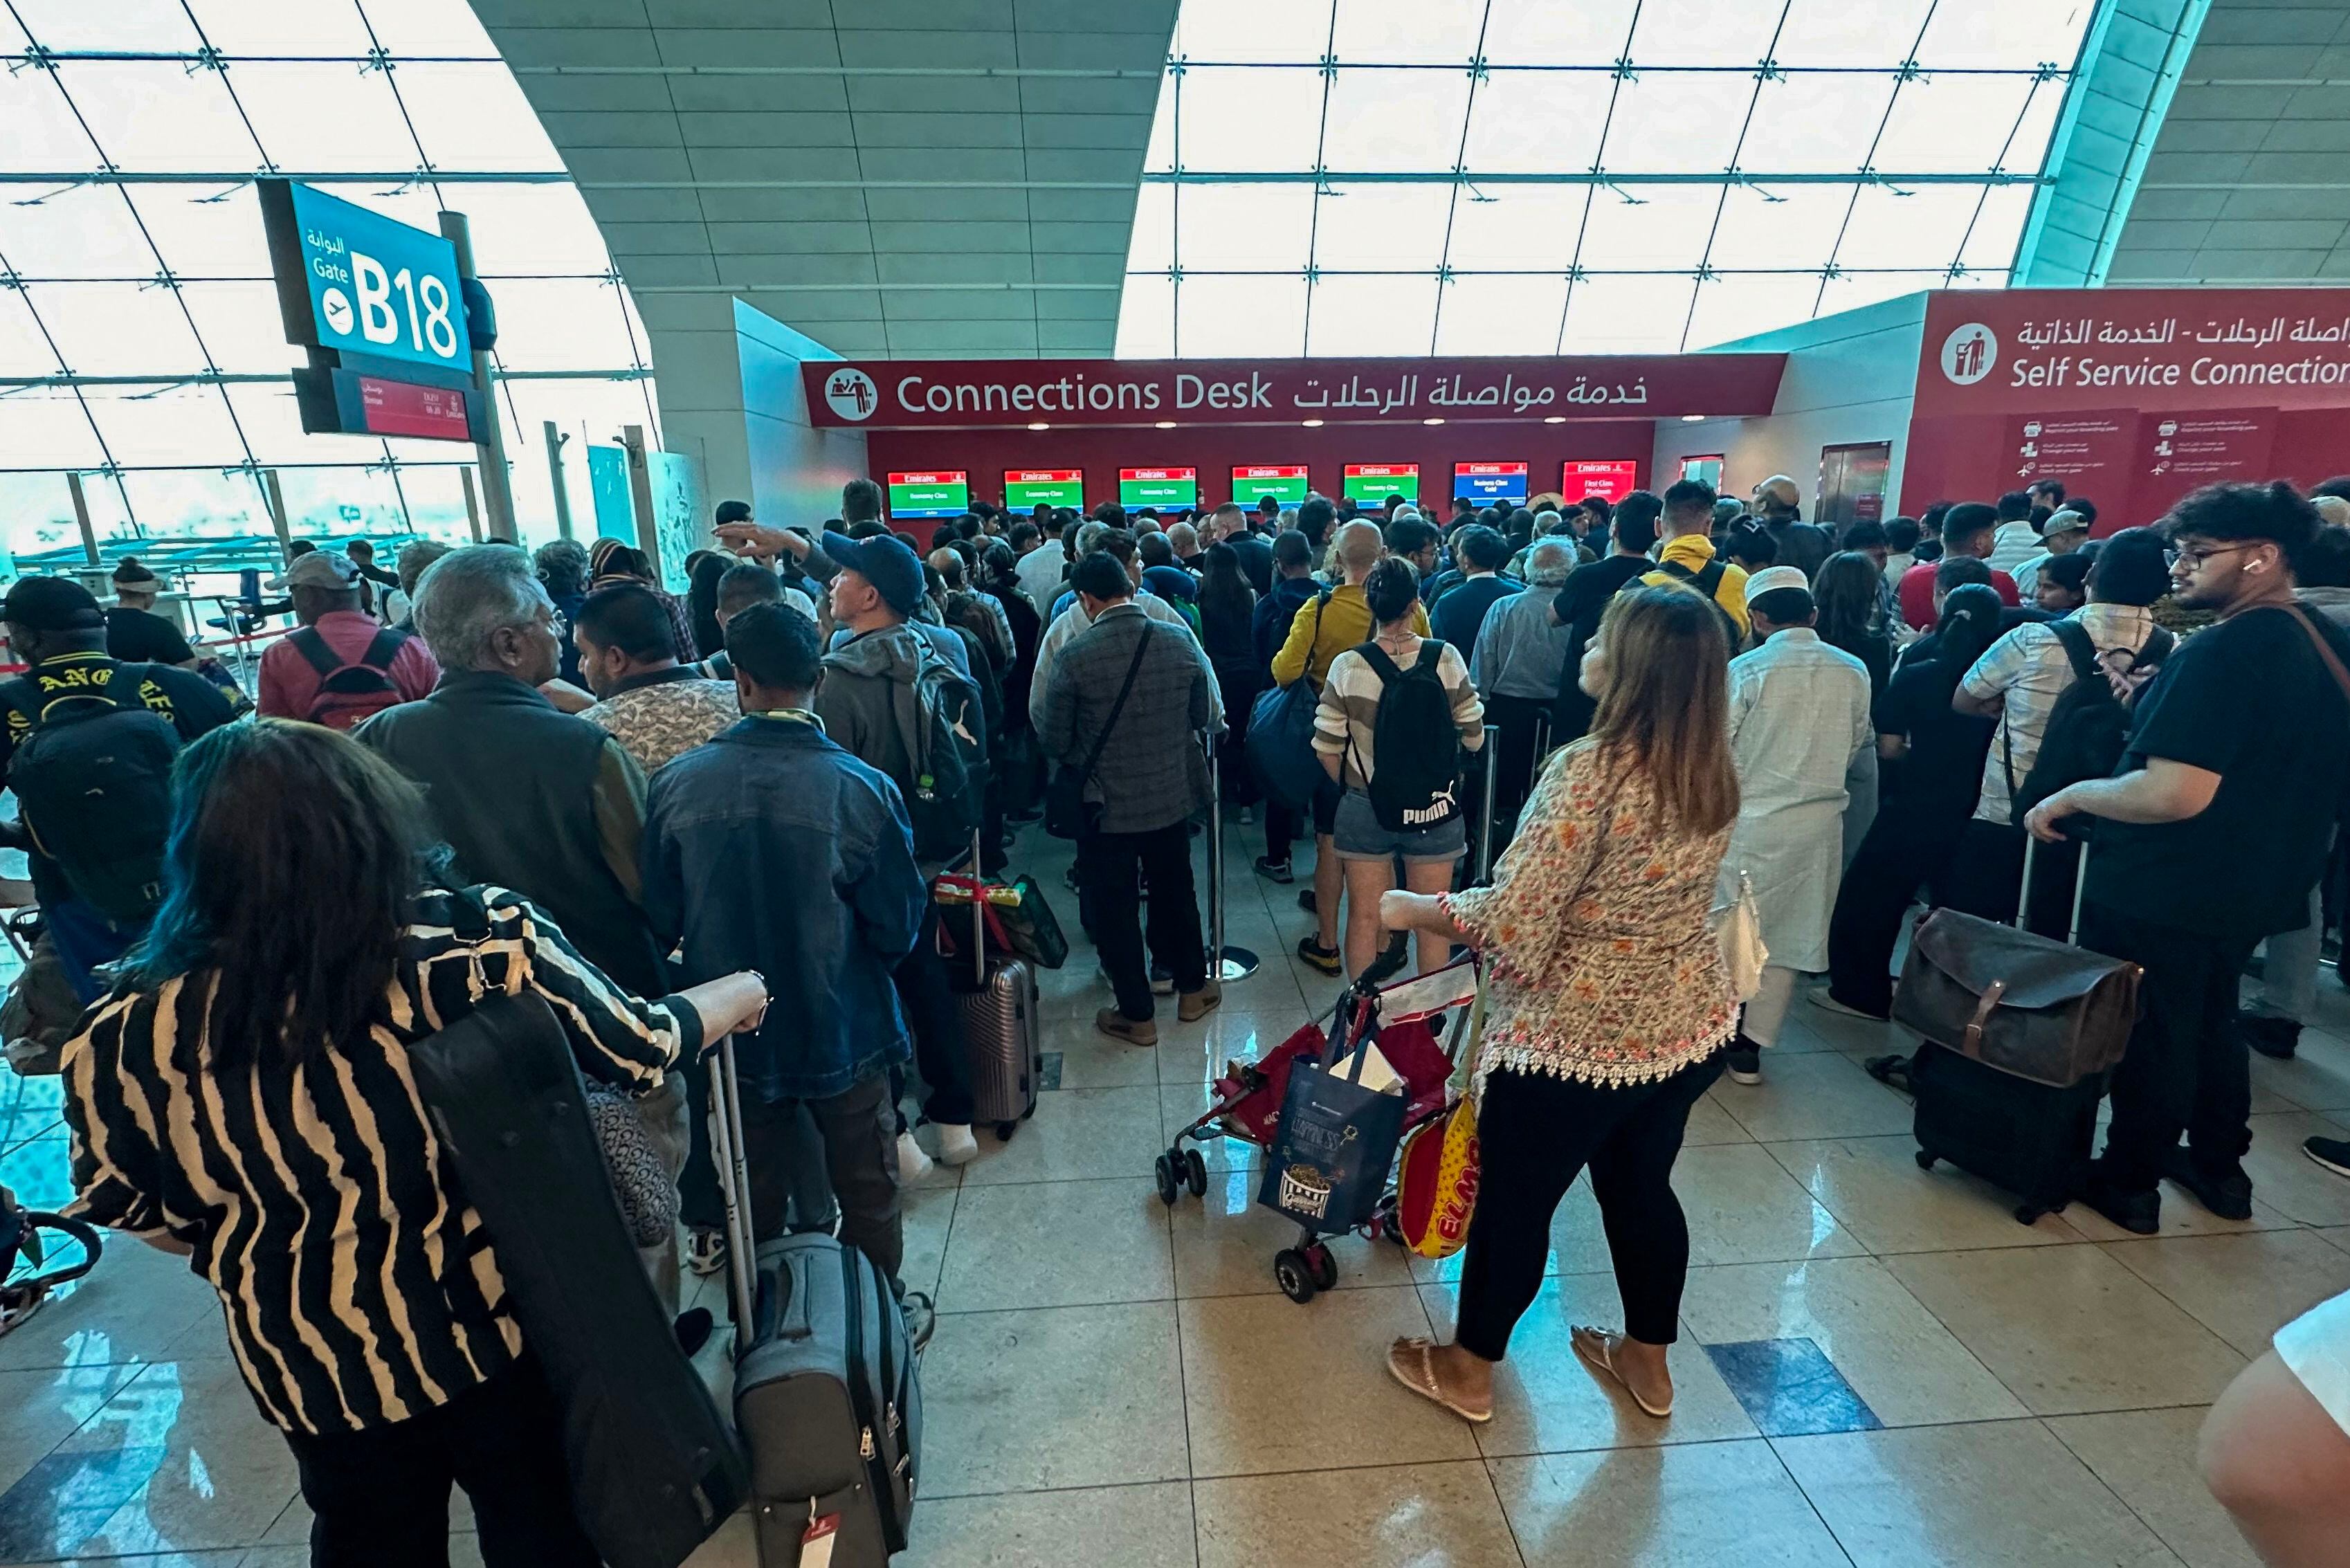 Passengers queue at a flight connection desk at the Dubai International Airport on Wednesday. Dubai's main airport diverted scores of incoming flights on Tuesday as heavy rains lashed the United Arab Emirates, causing widespread flooding around the country.